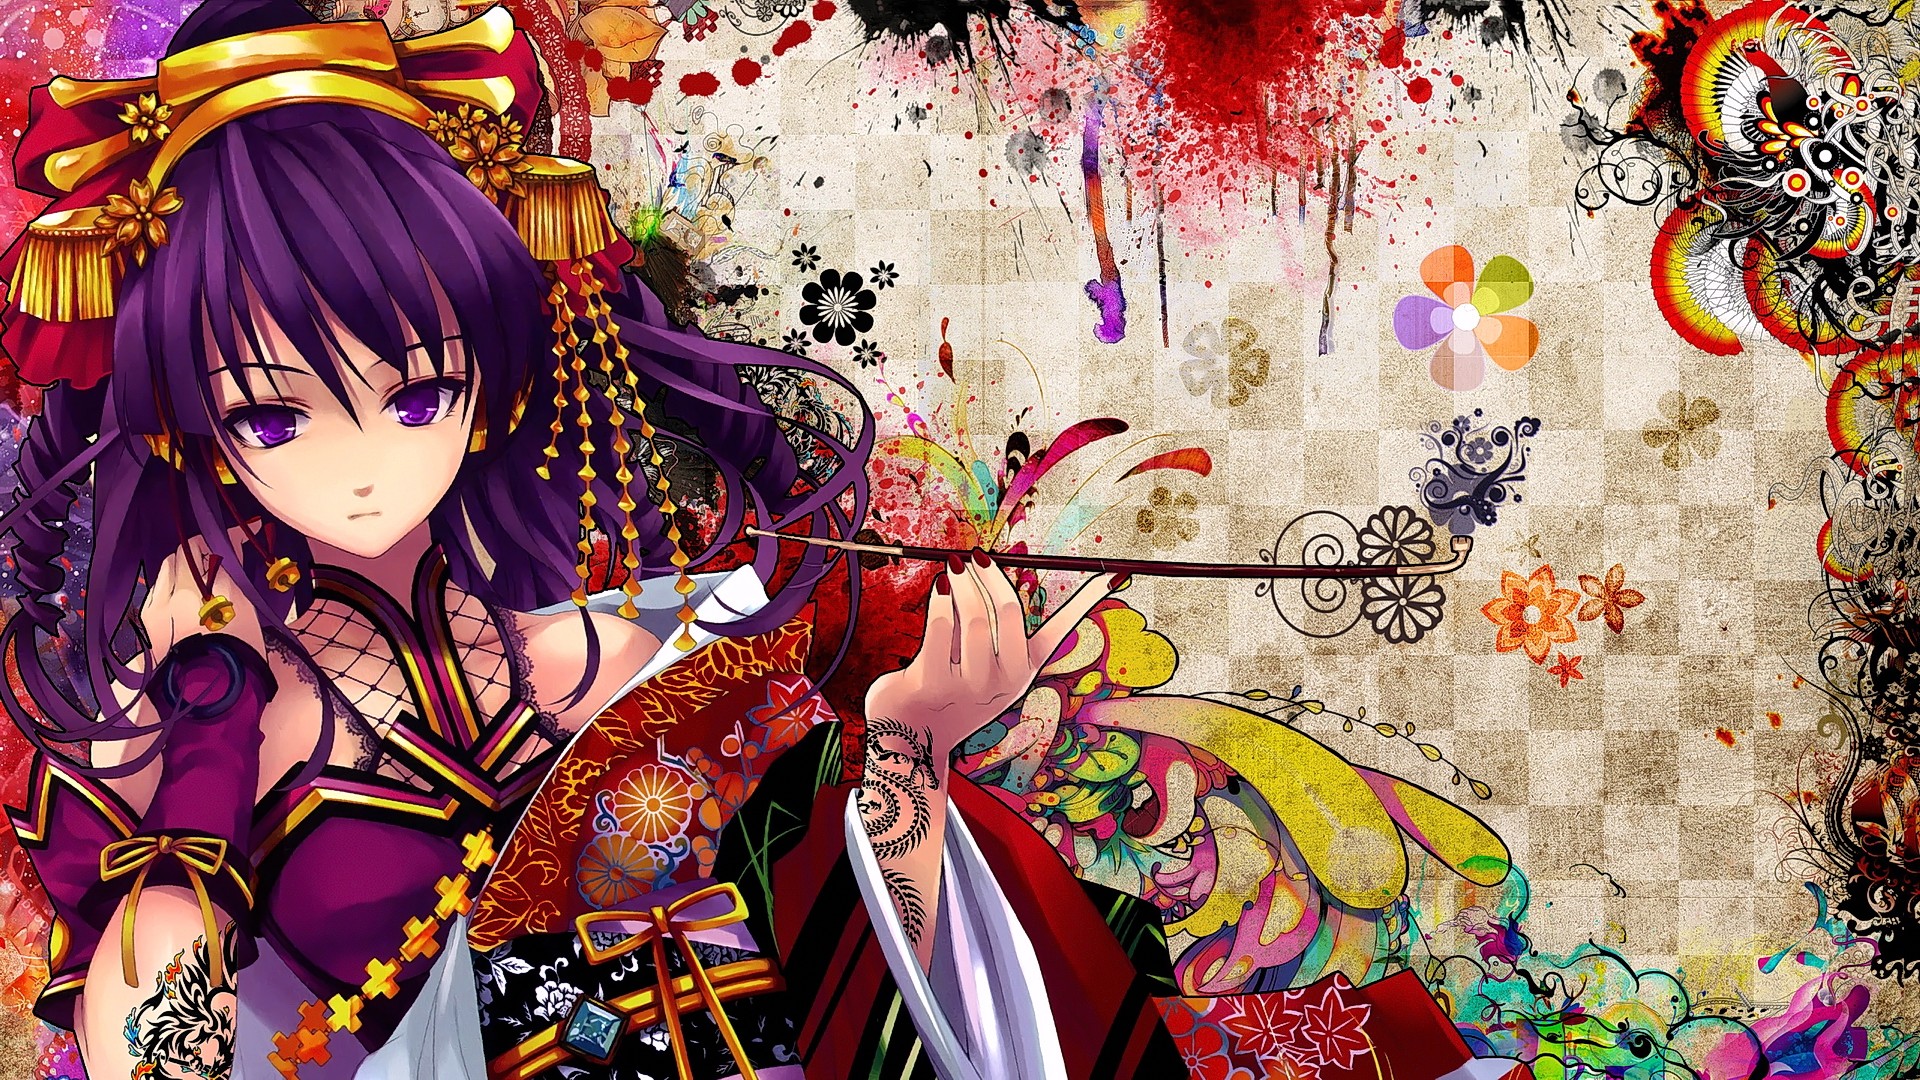 Anime 1920x1080 anime girls purple hair purple eyes fantasy girl painted nails colorful anime fantasy art red nails